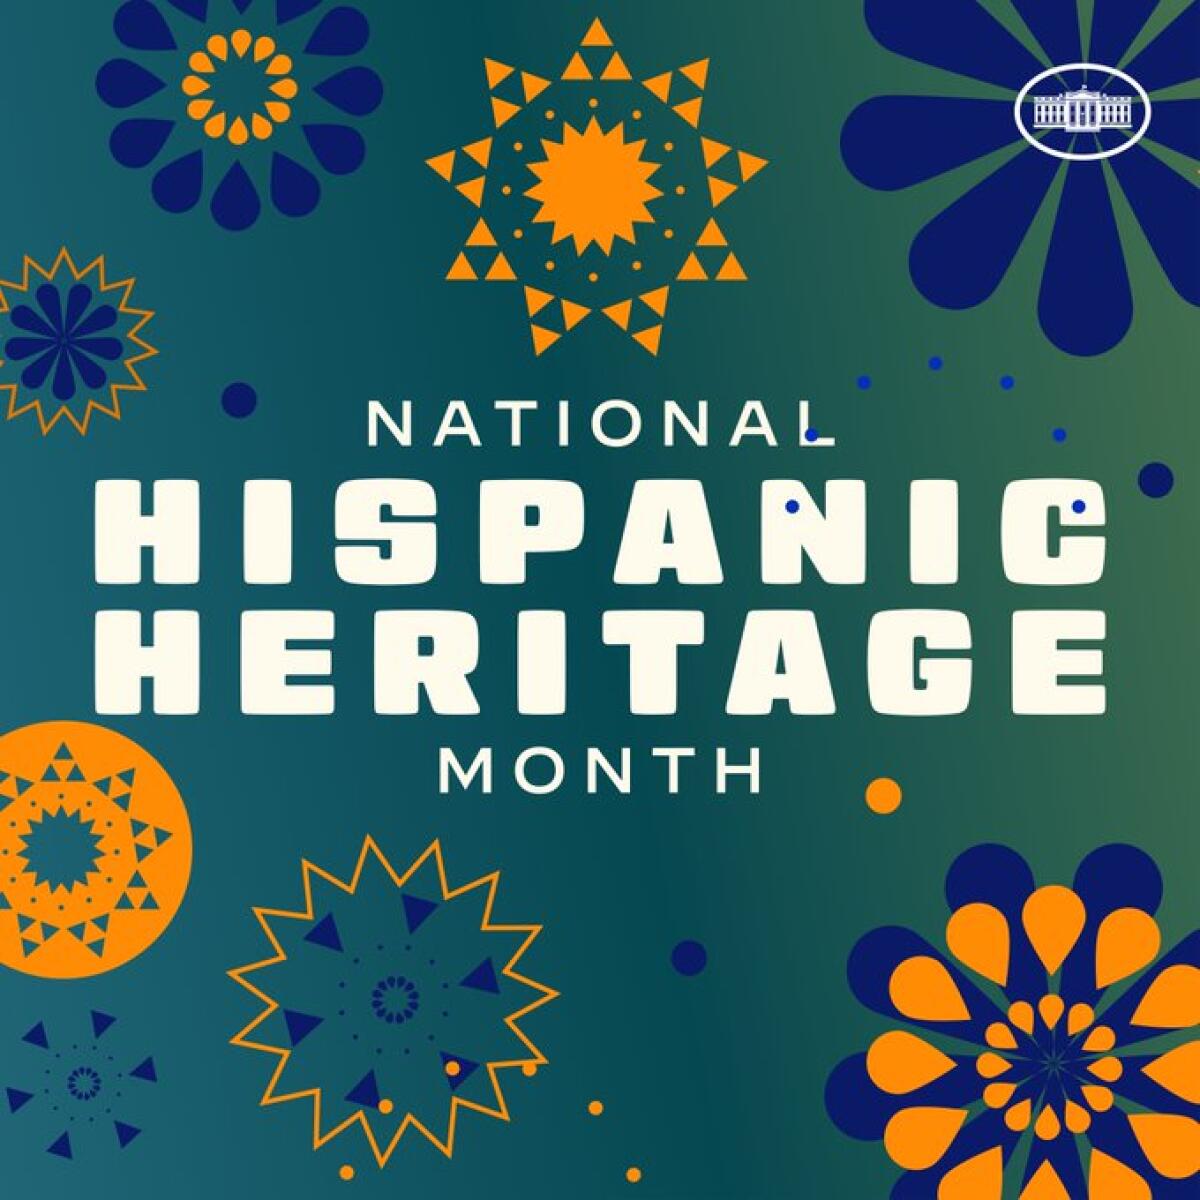 Floral patterns rendered in abstract geometric ways adorn a graphic that reads "National Hispanic Heritage Month"